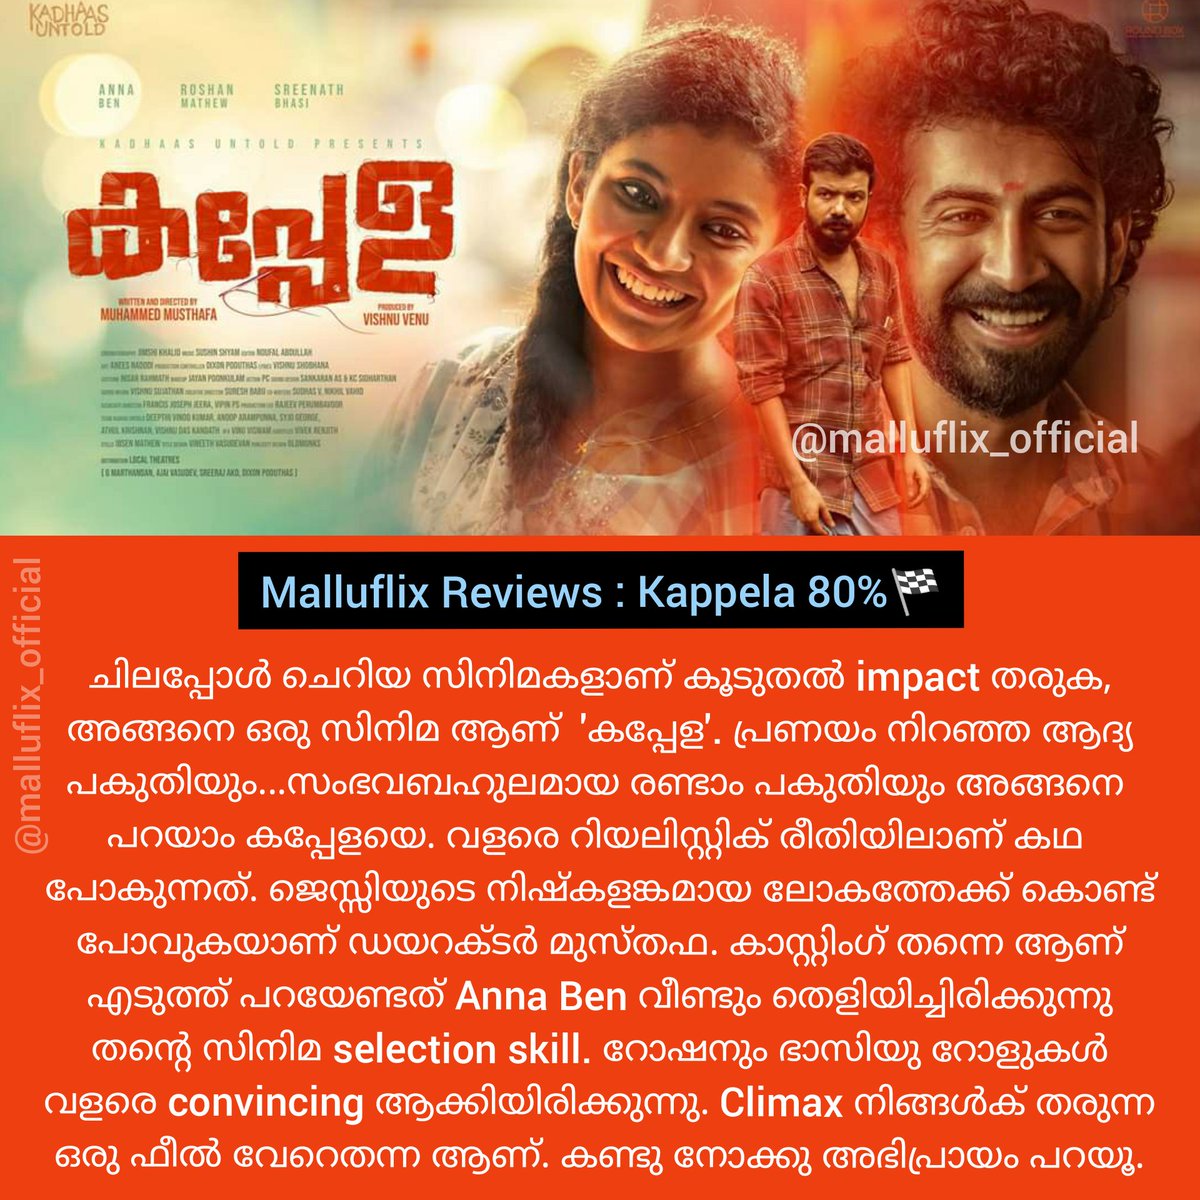 Movie : Kappela
Release date : 6 March 2020
Language : Malayalam
Malluflix Score : 80% 🏁
Running in theatres now !
#Kappela #MovieReview #KappelaReview #MalayalamMovieReview